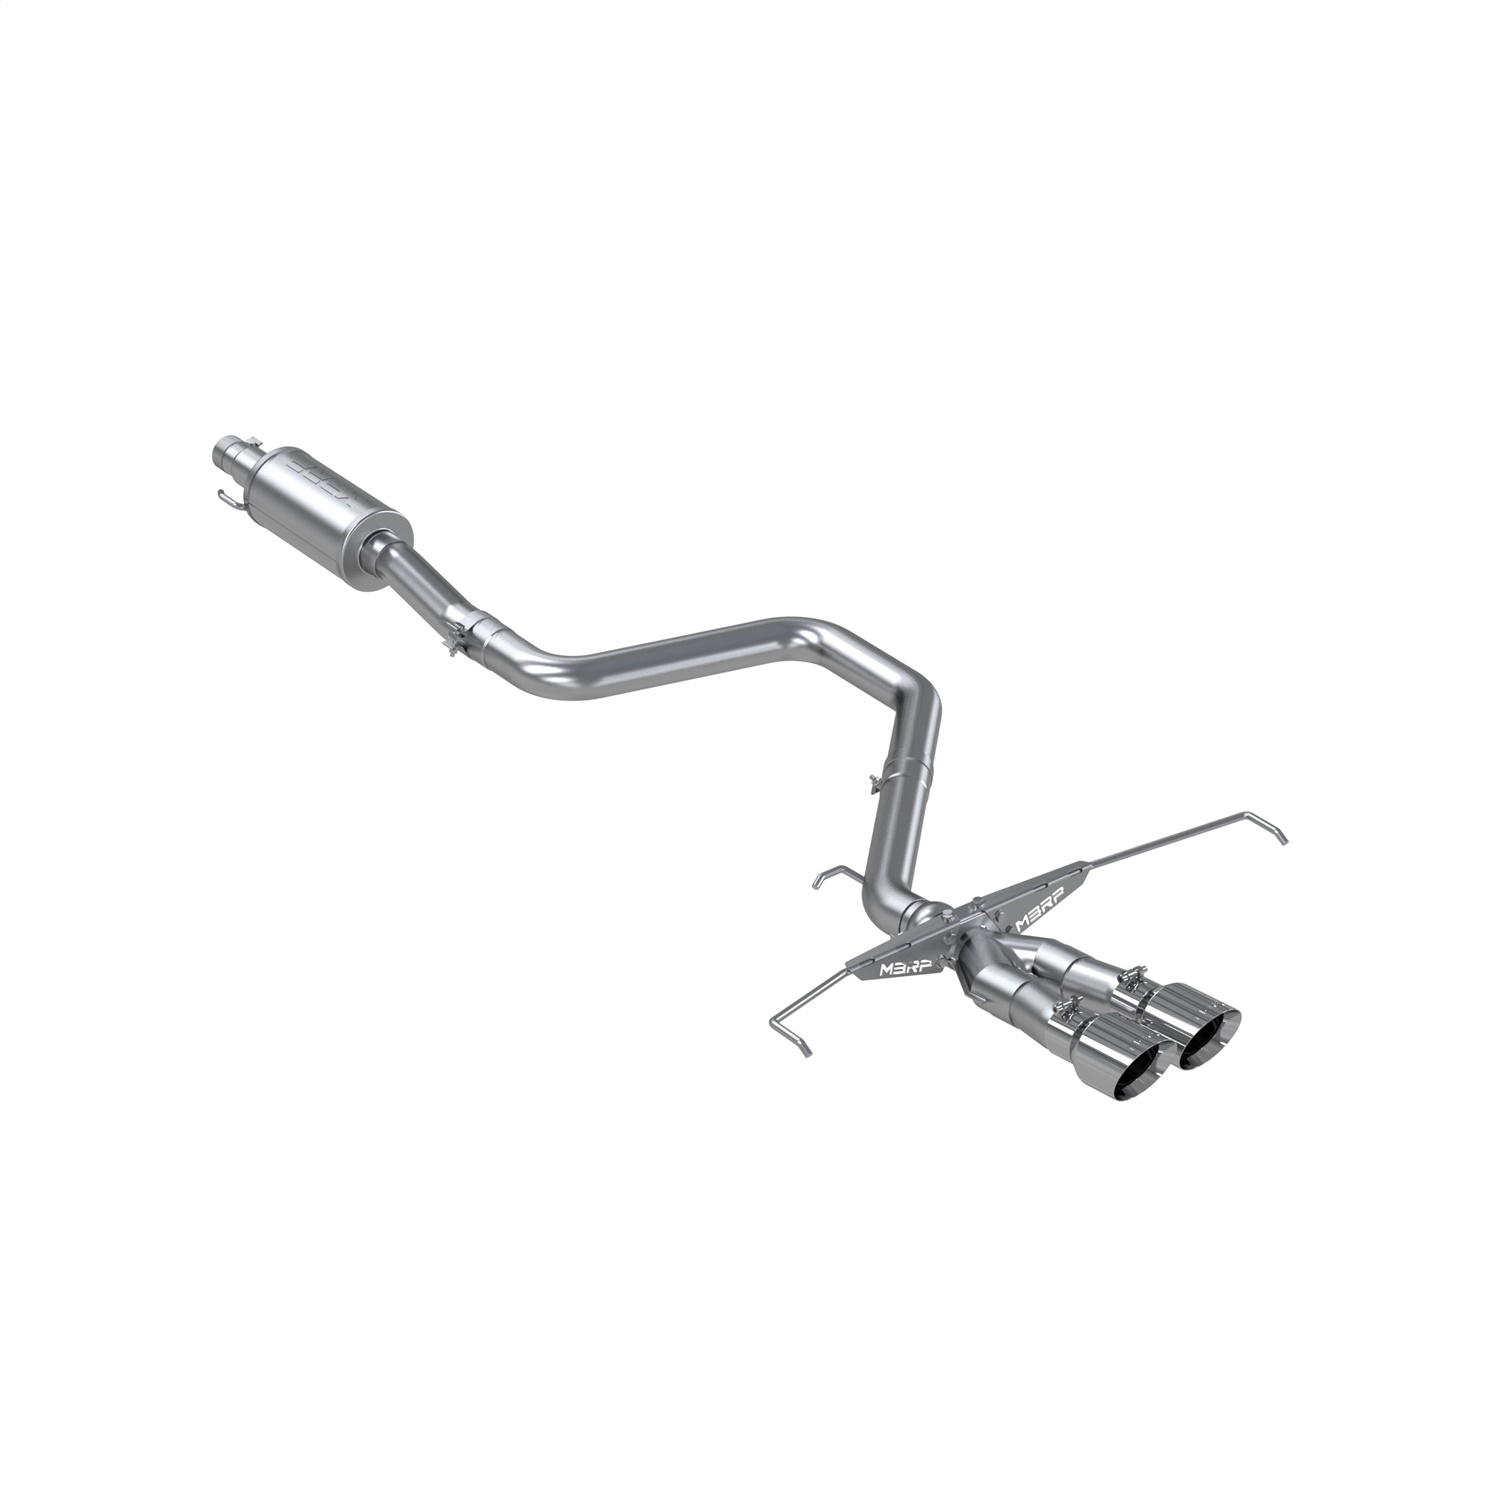 MBRP Exhaust S4705AL Armor Lite Cat Back Exhaust System Fits 19-21 Veloster